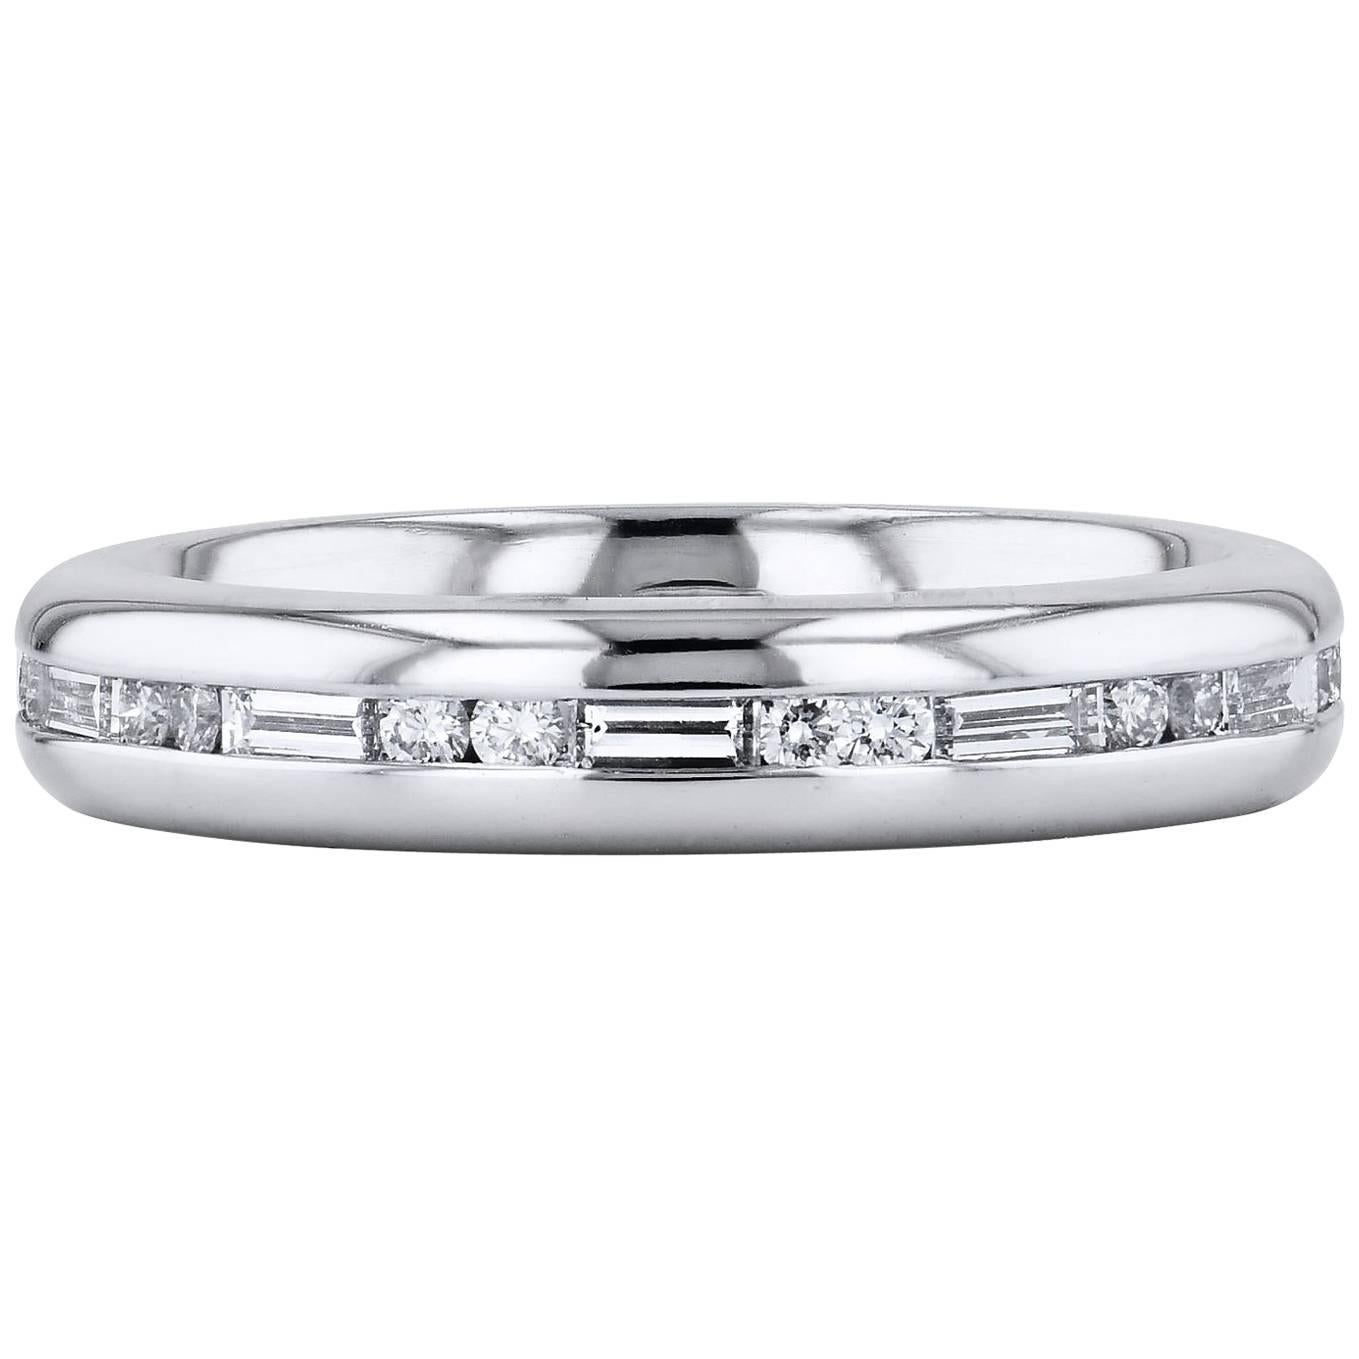 H&H Round Cut and Baguette Cut Diamond Satin Finish Eternity Band Ring 6